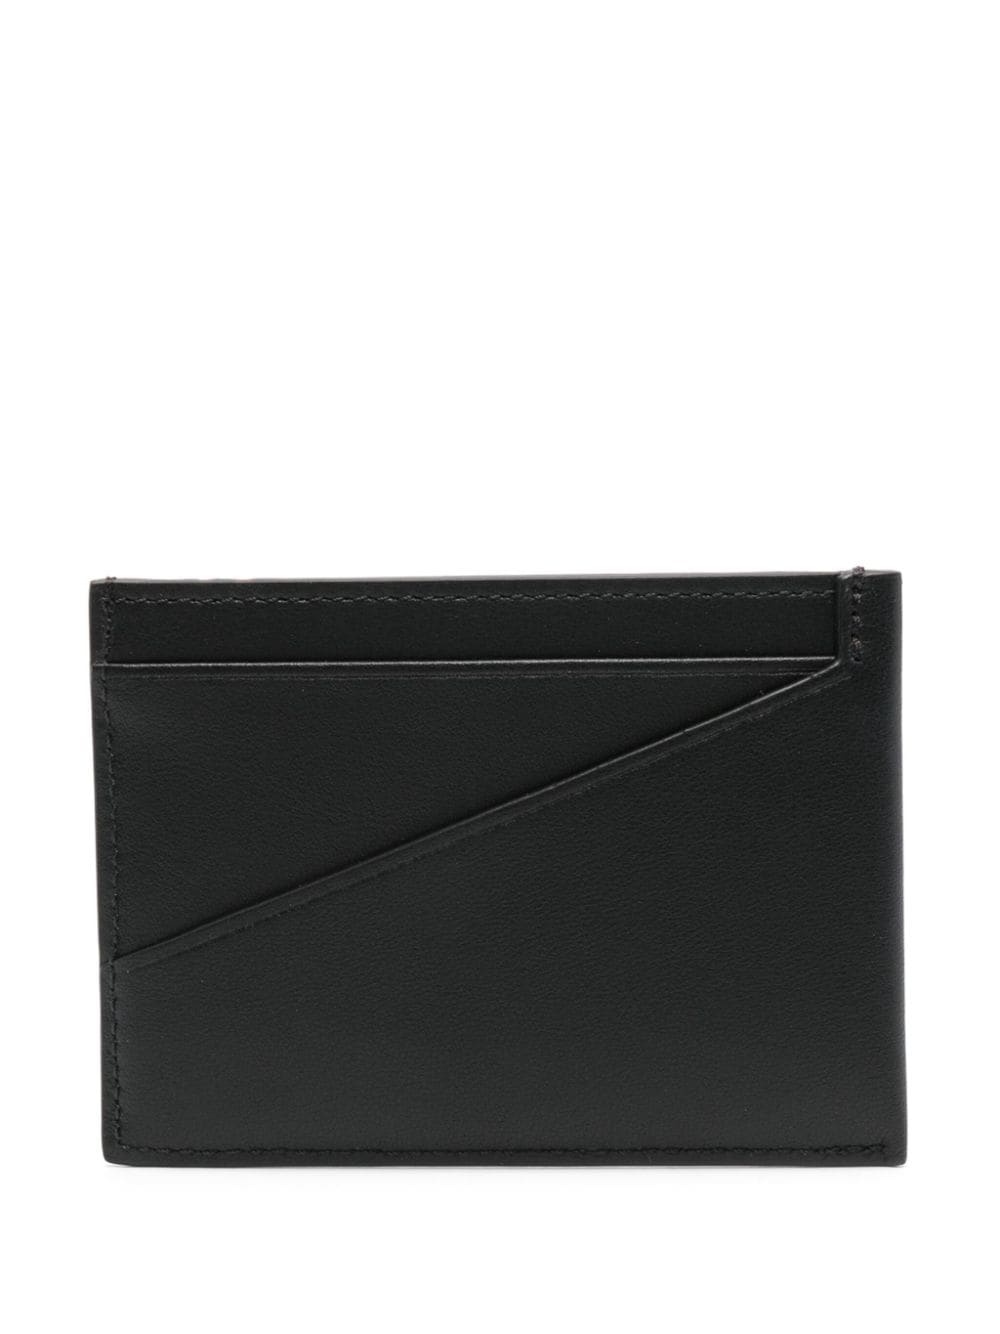 Camberwell leather cardholder - 2